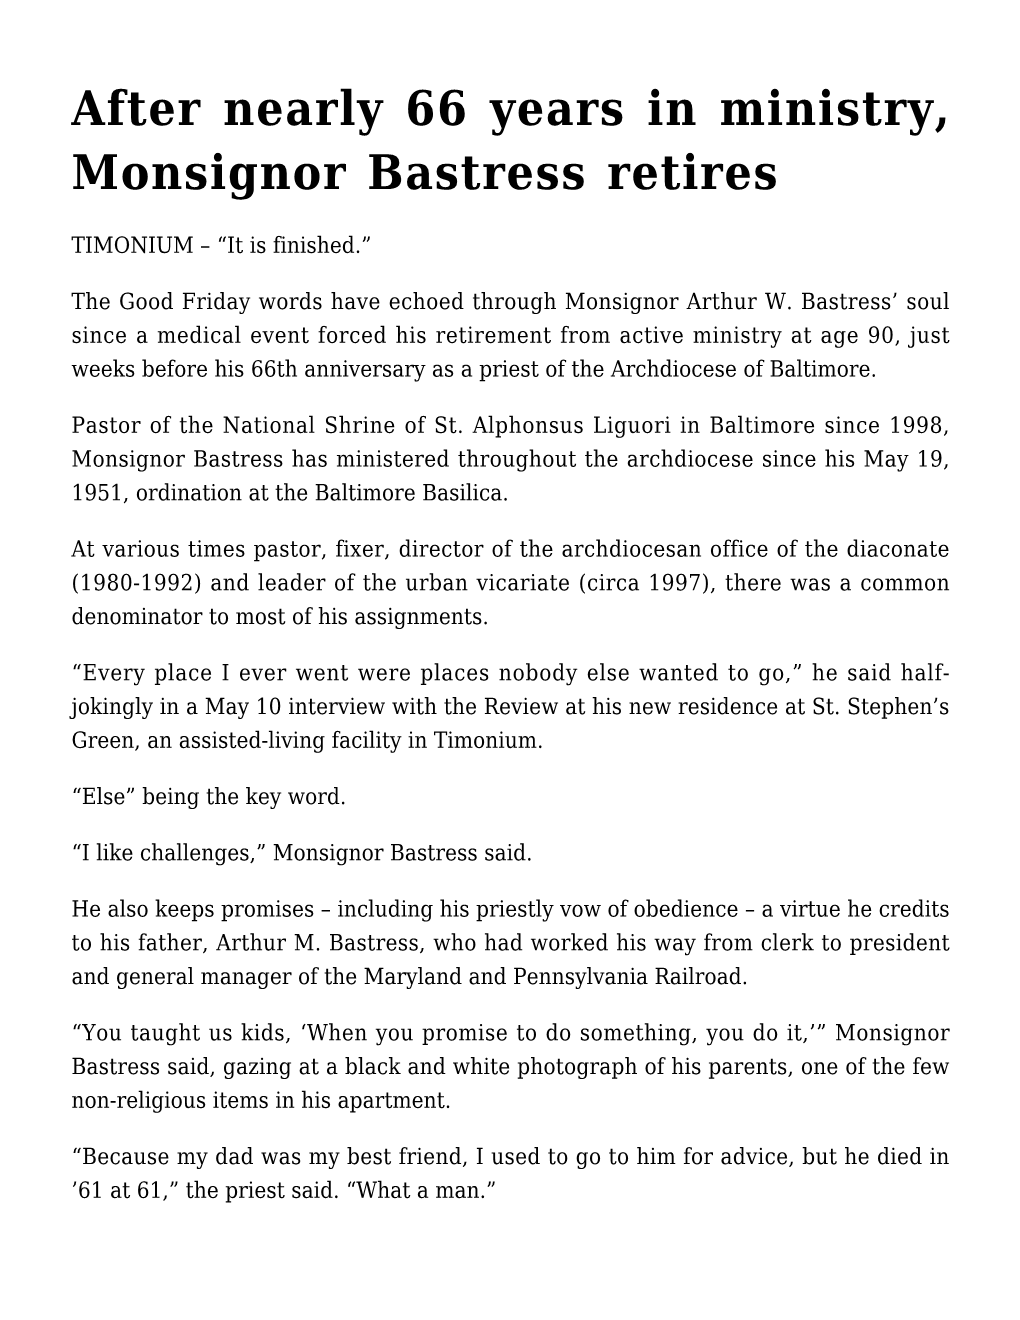 After Nearly 66 Years in Ministry, Monsignor Bastress Retires